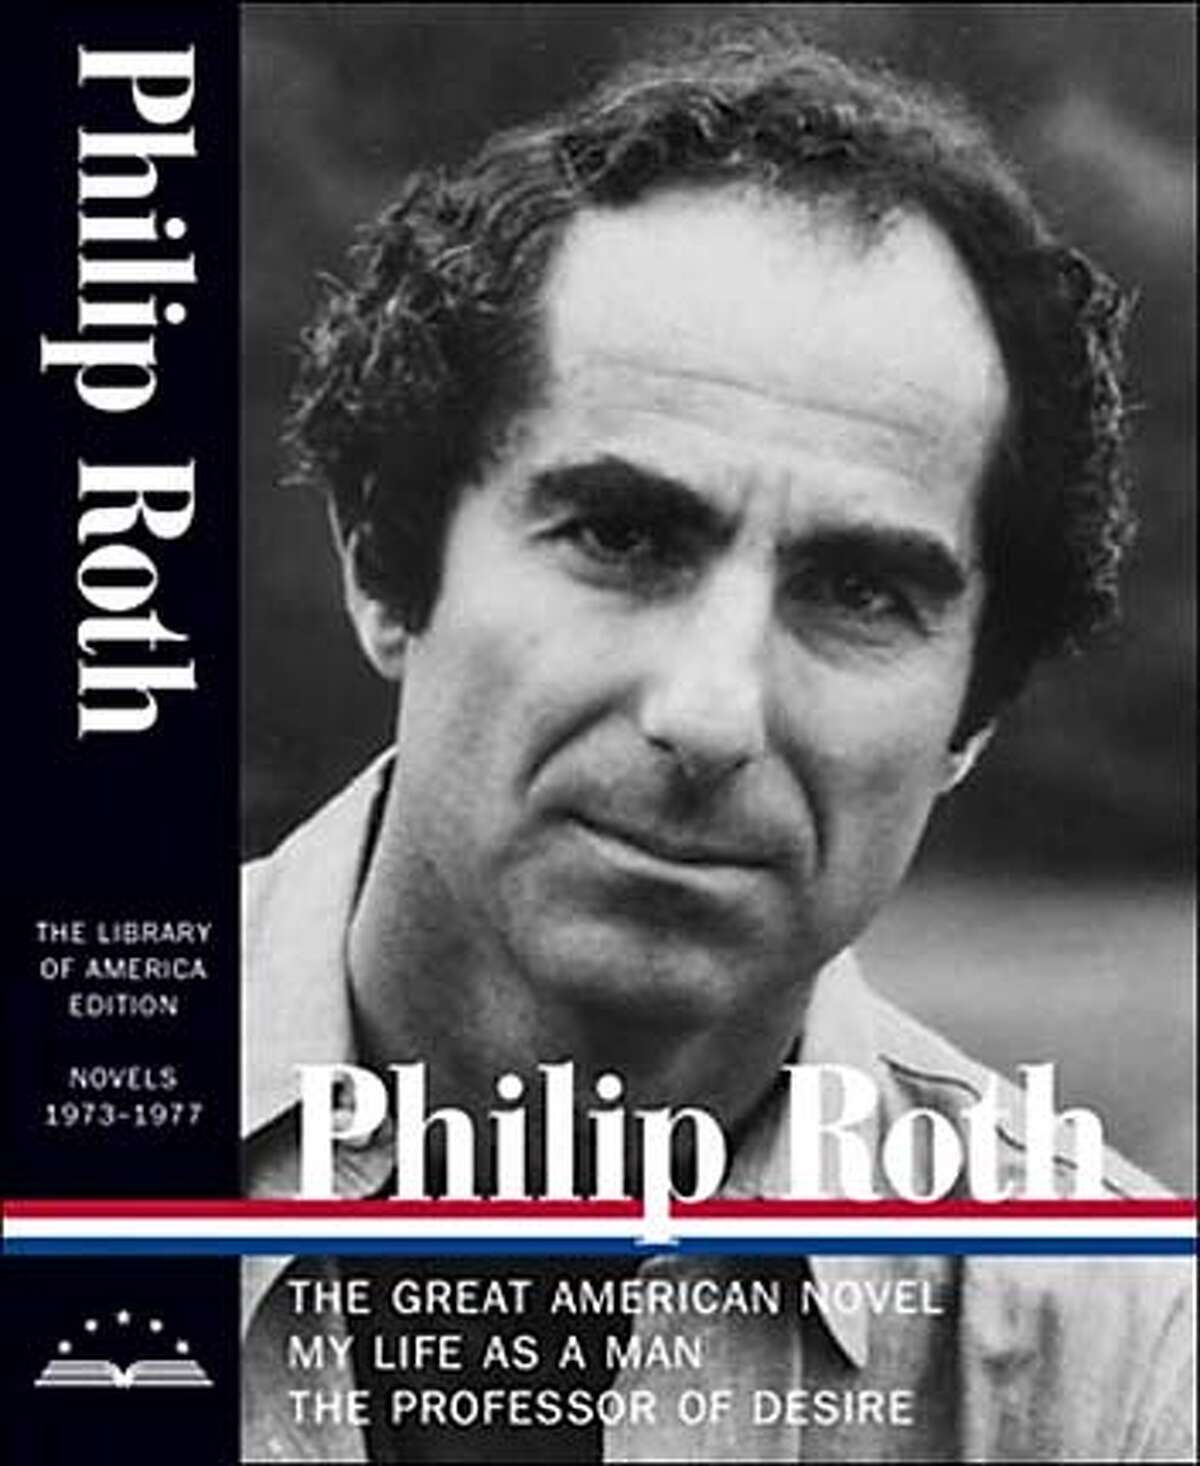 Philip Roth's "The Great American Novel, My Life as a Man, The Professor of Desire"